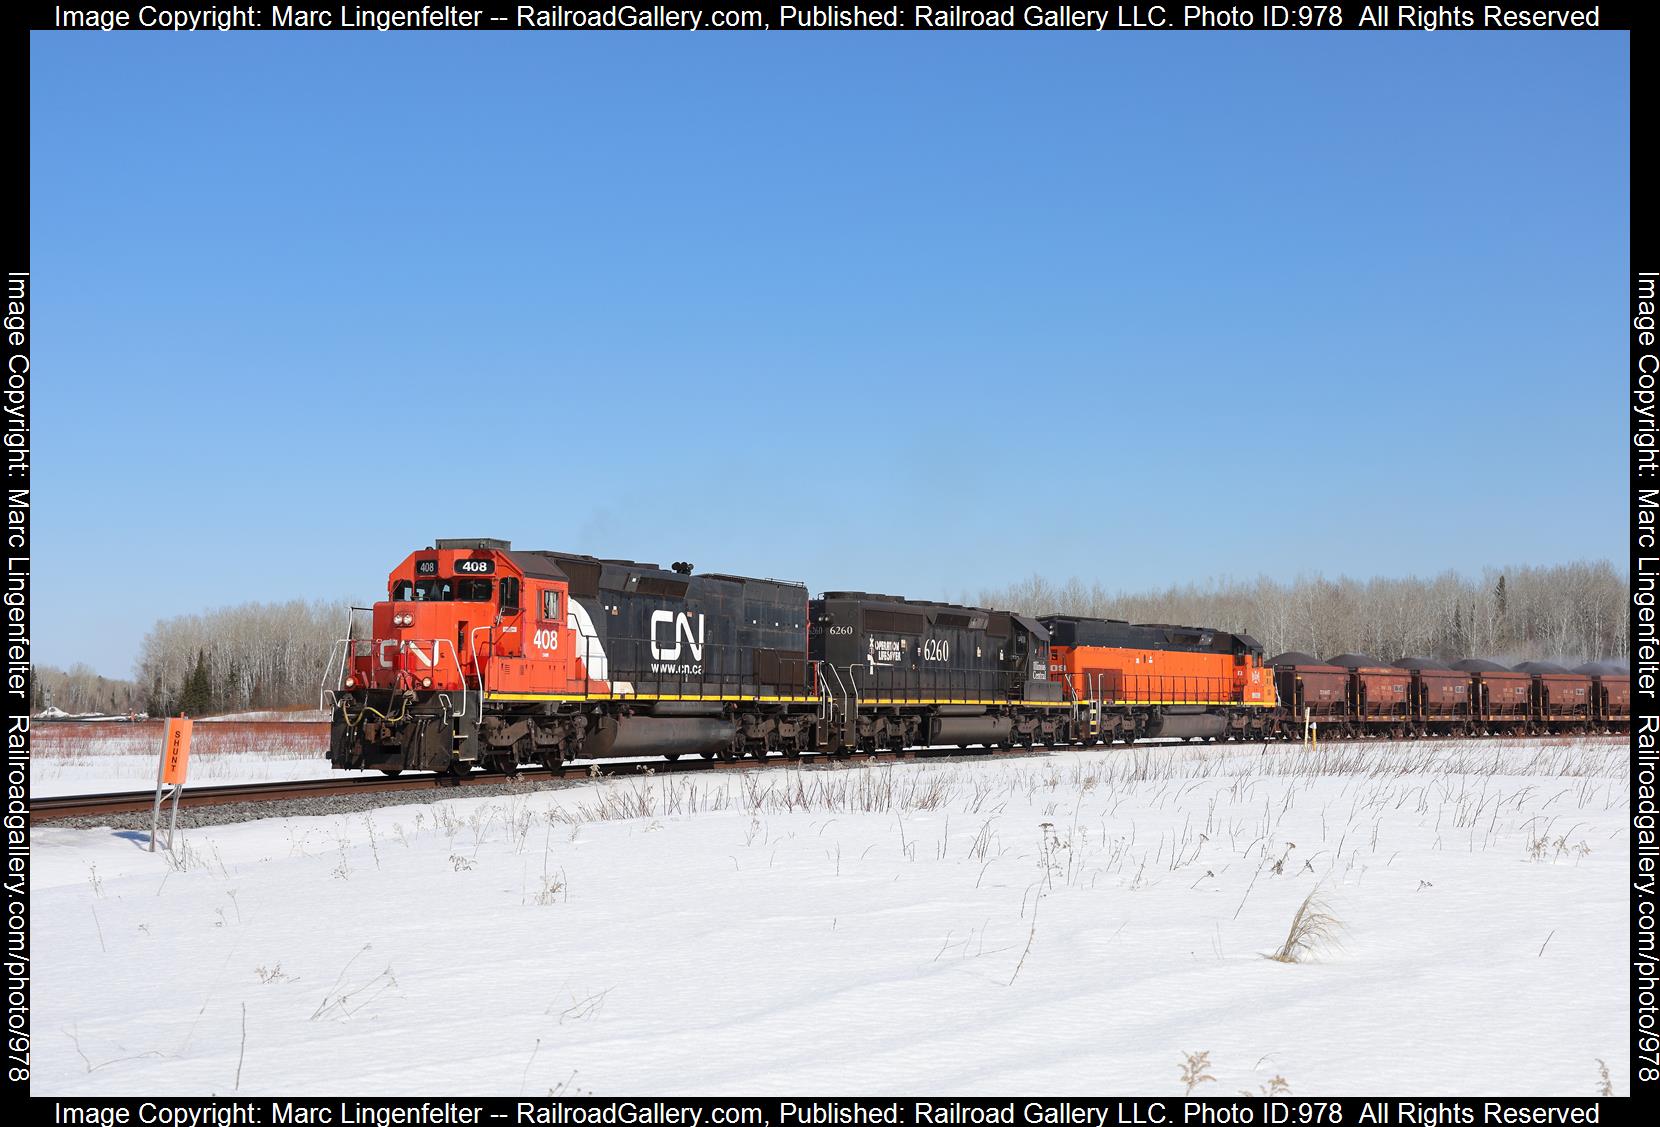 CN 408 is a class EMD SD40-3 and  is pictured in Fairlane, Minnesota, USA.  This was taken along the CN Missabe Sub on the Canadian National Railway. Photo Copyright: Marc Lingenfelter uploaded to Railroad Gallery on 04/19/2023. This photograph of CN 408 was taken on Sunday, March 26, 2023. All Rights Reserved. 